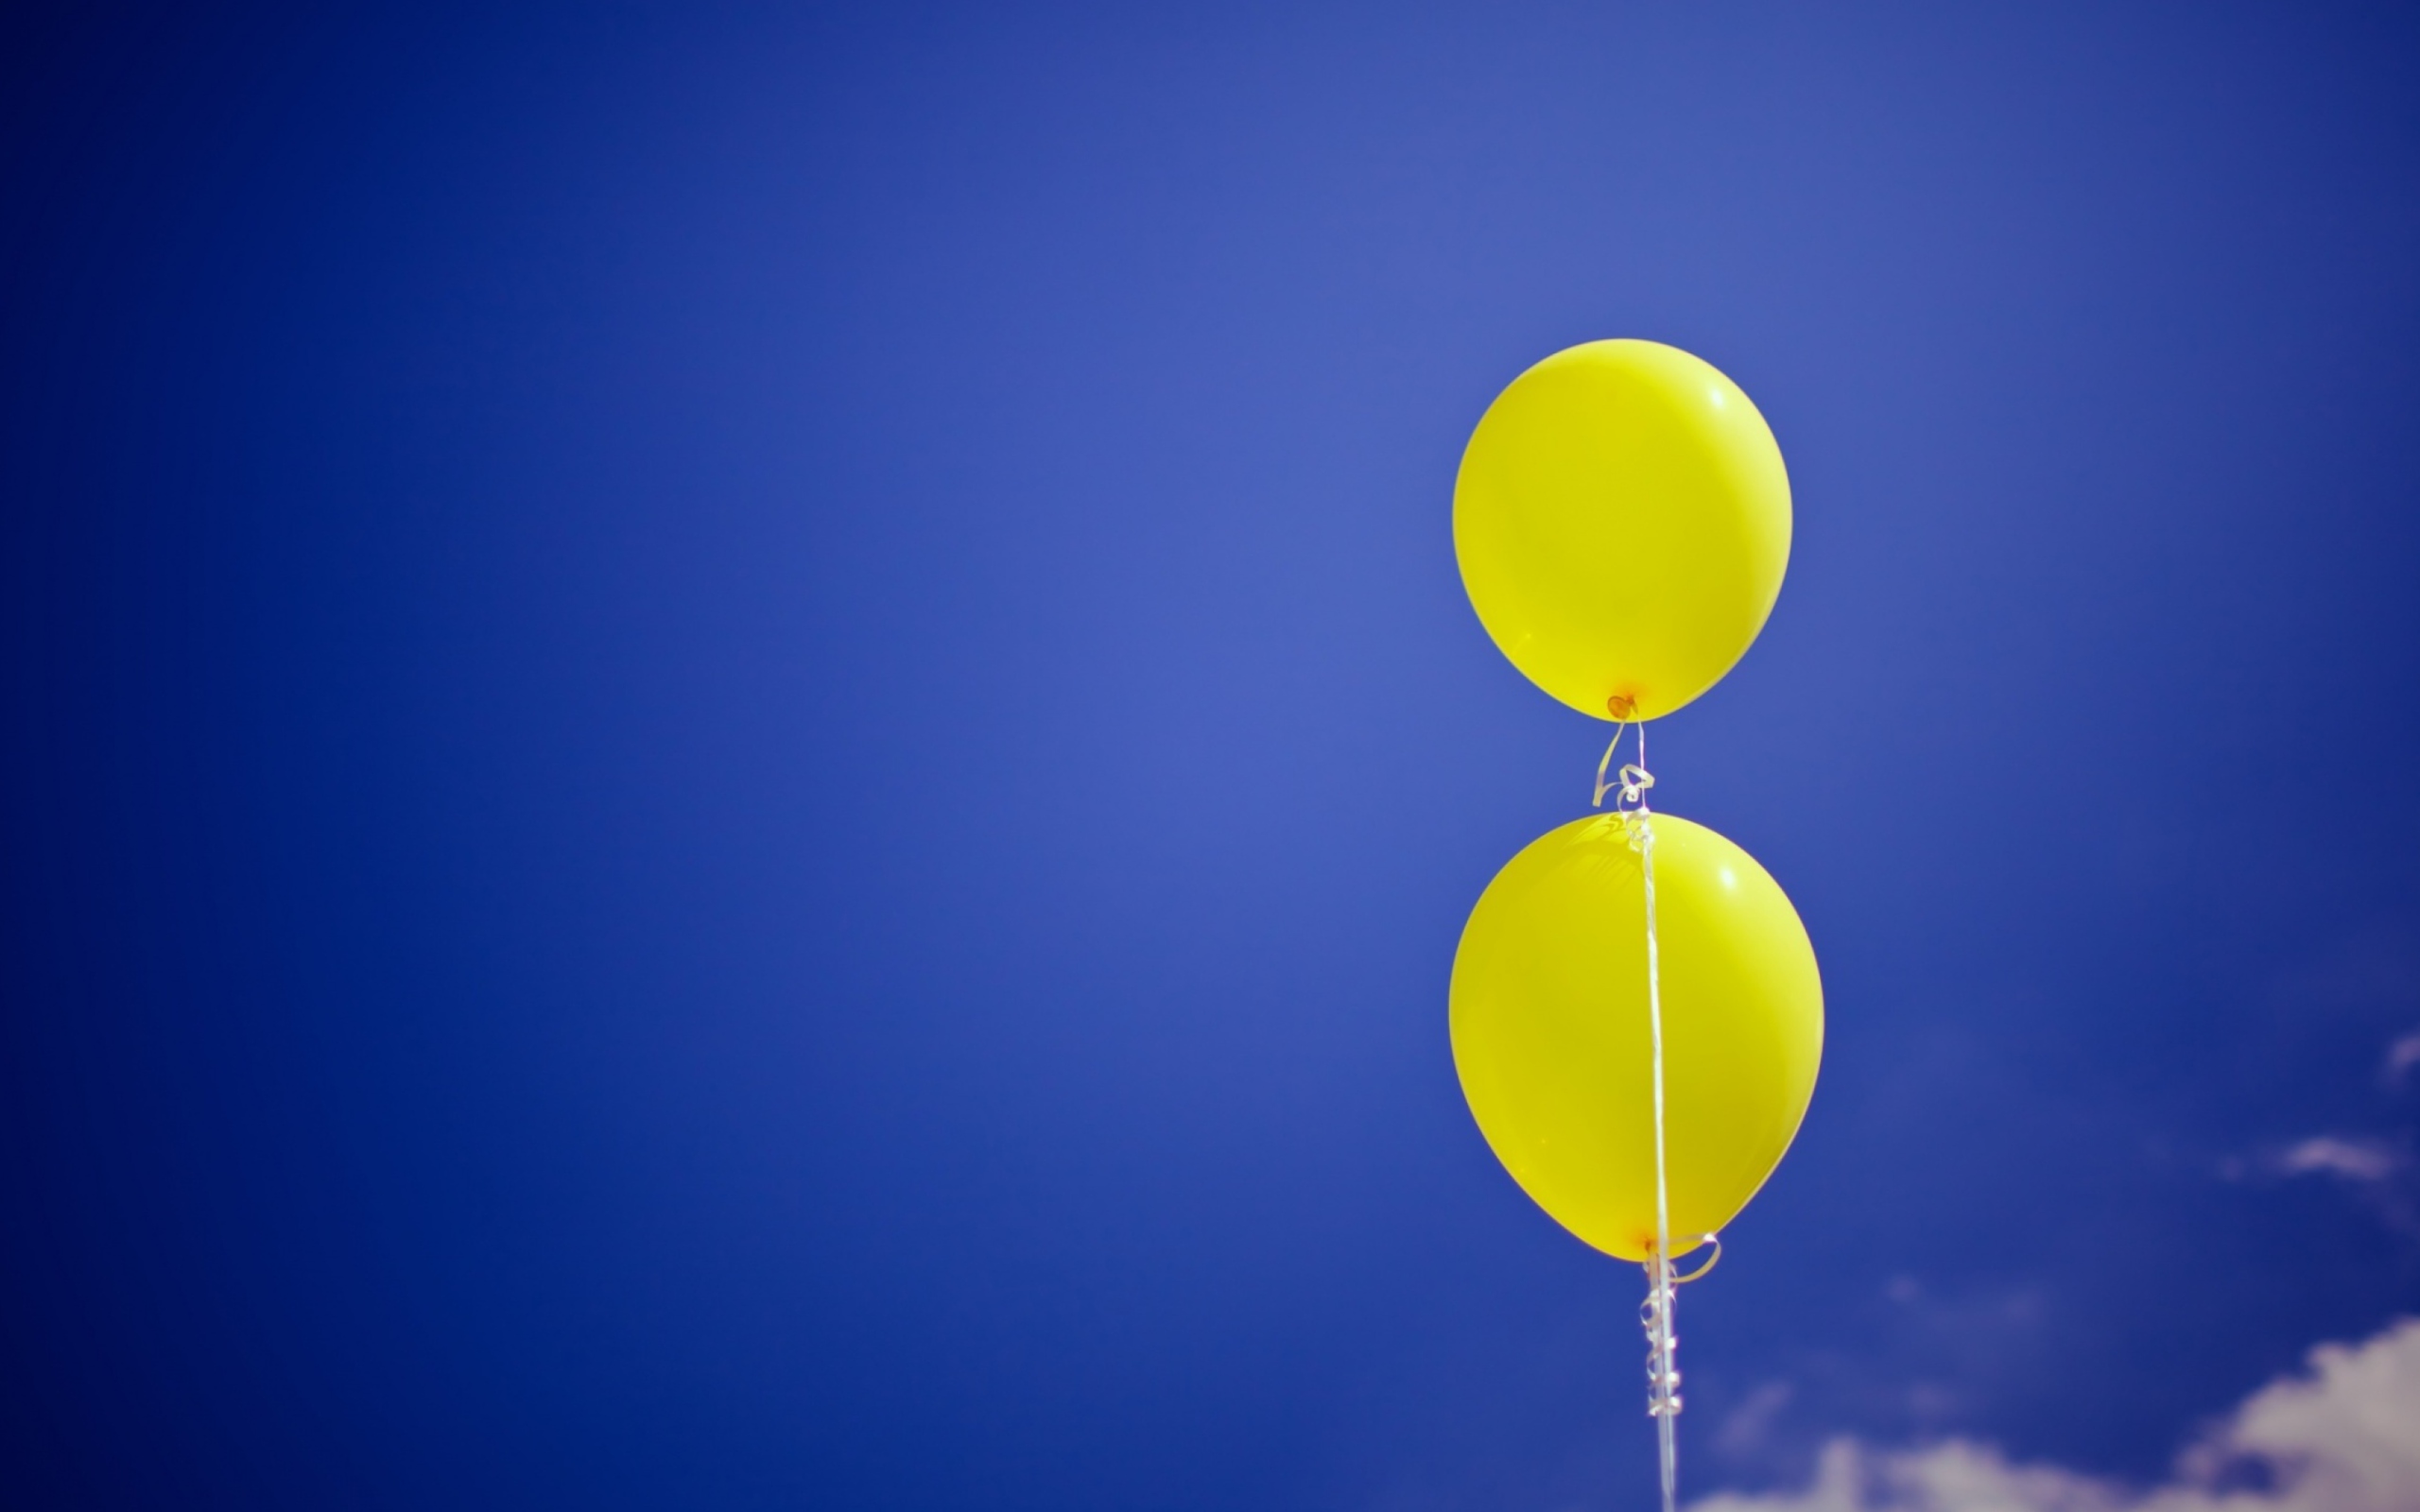 Yellow Balloons In The Blue Sky wallpaper 2560x1600